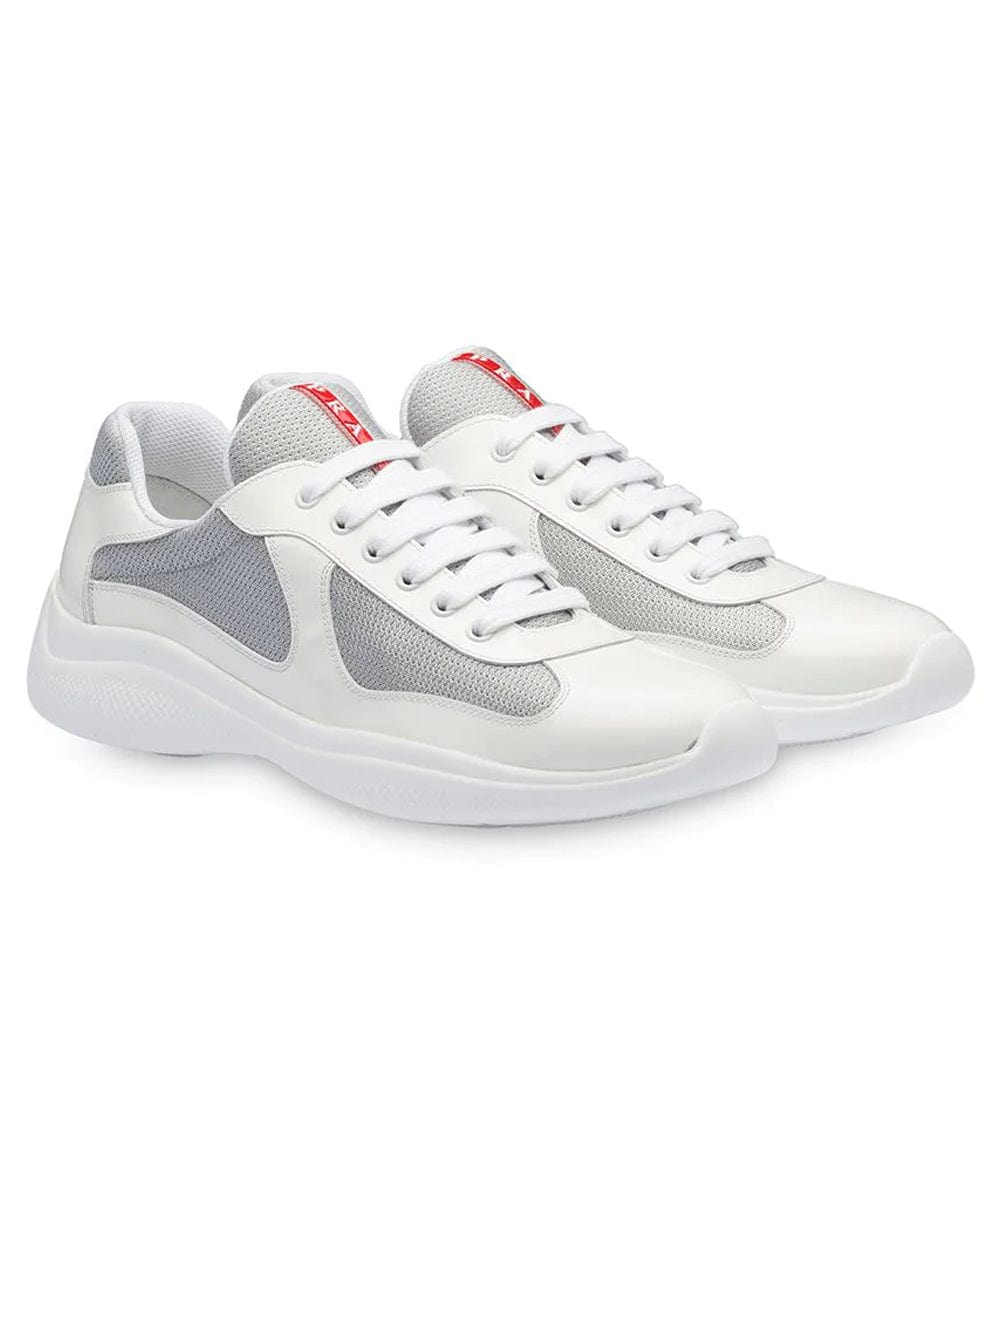 Prada America's Cup White Leather Patent Sneakers – Aztec Clothing